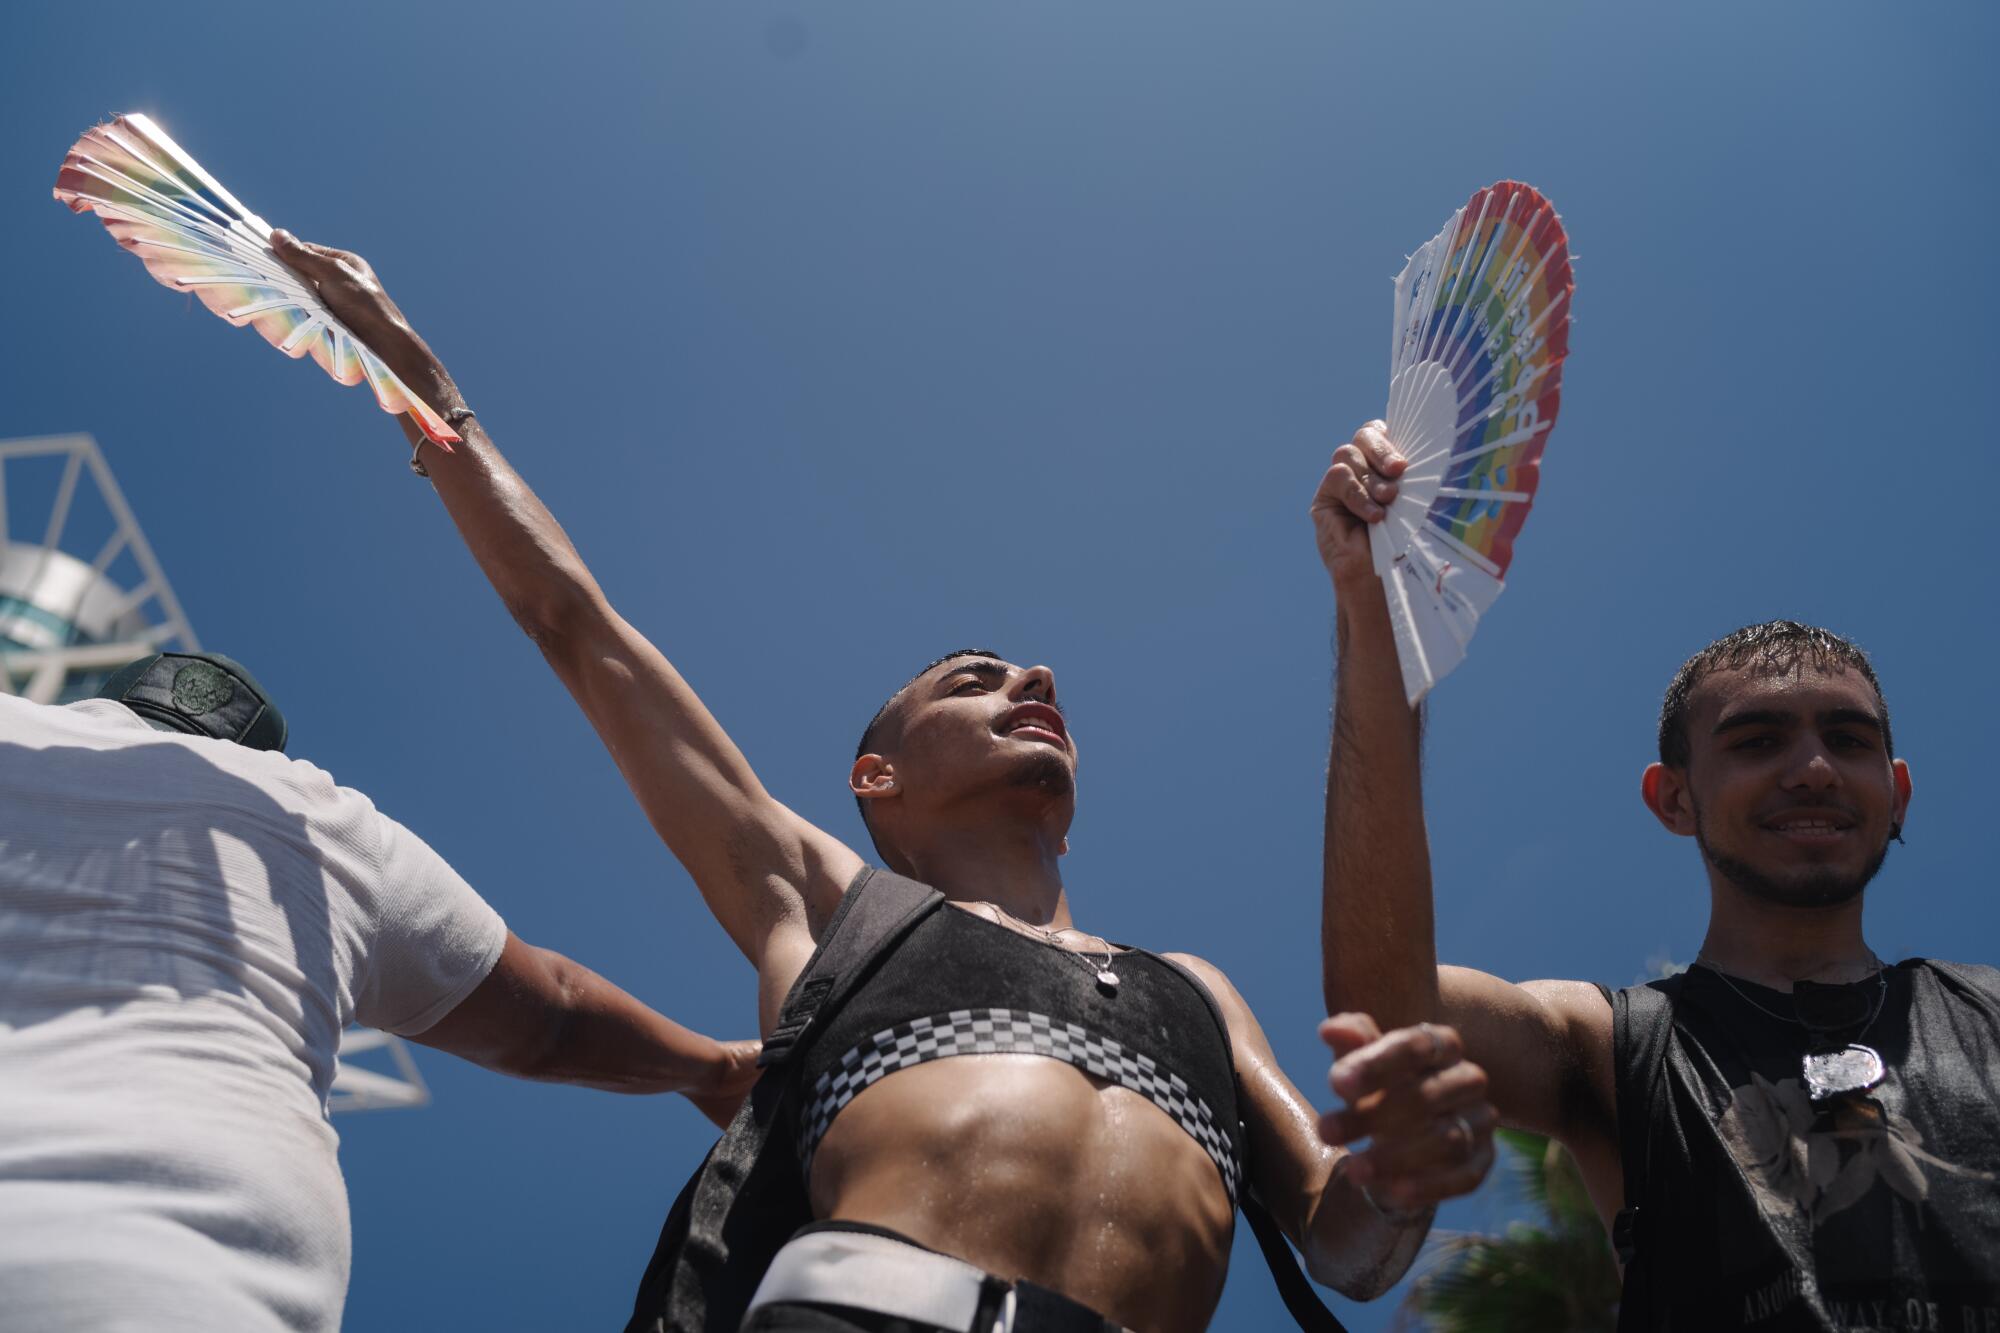 Pride parade attendees dance on a platform along the beach in Tel Aviv